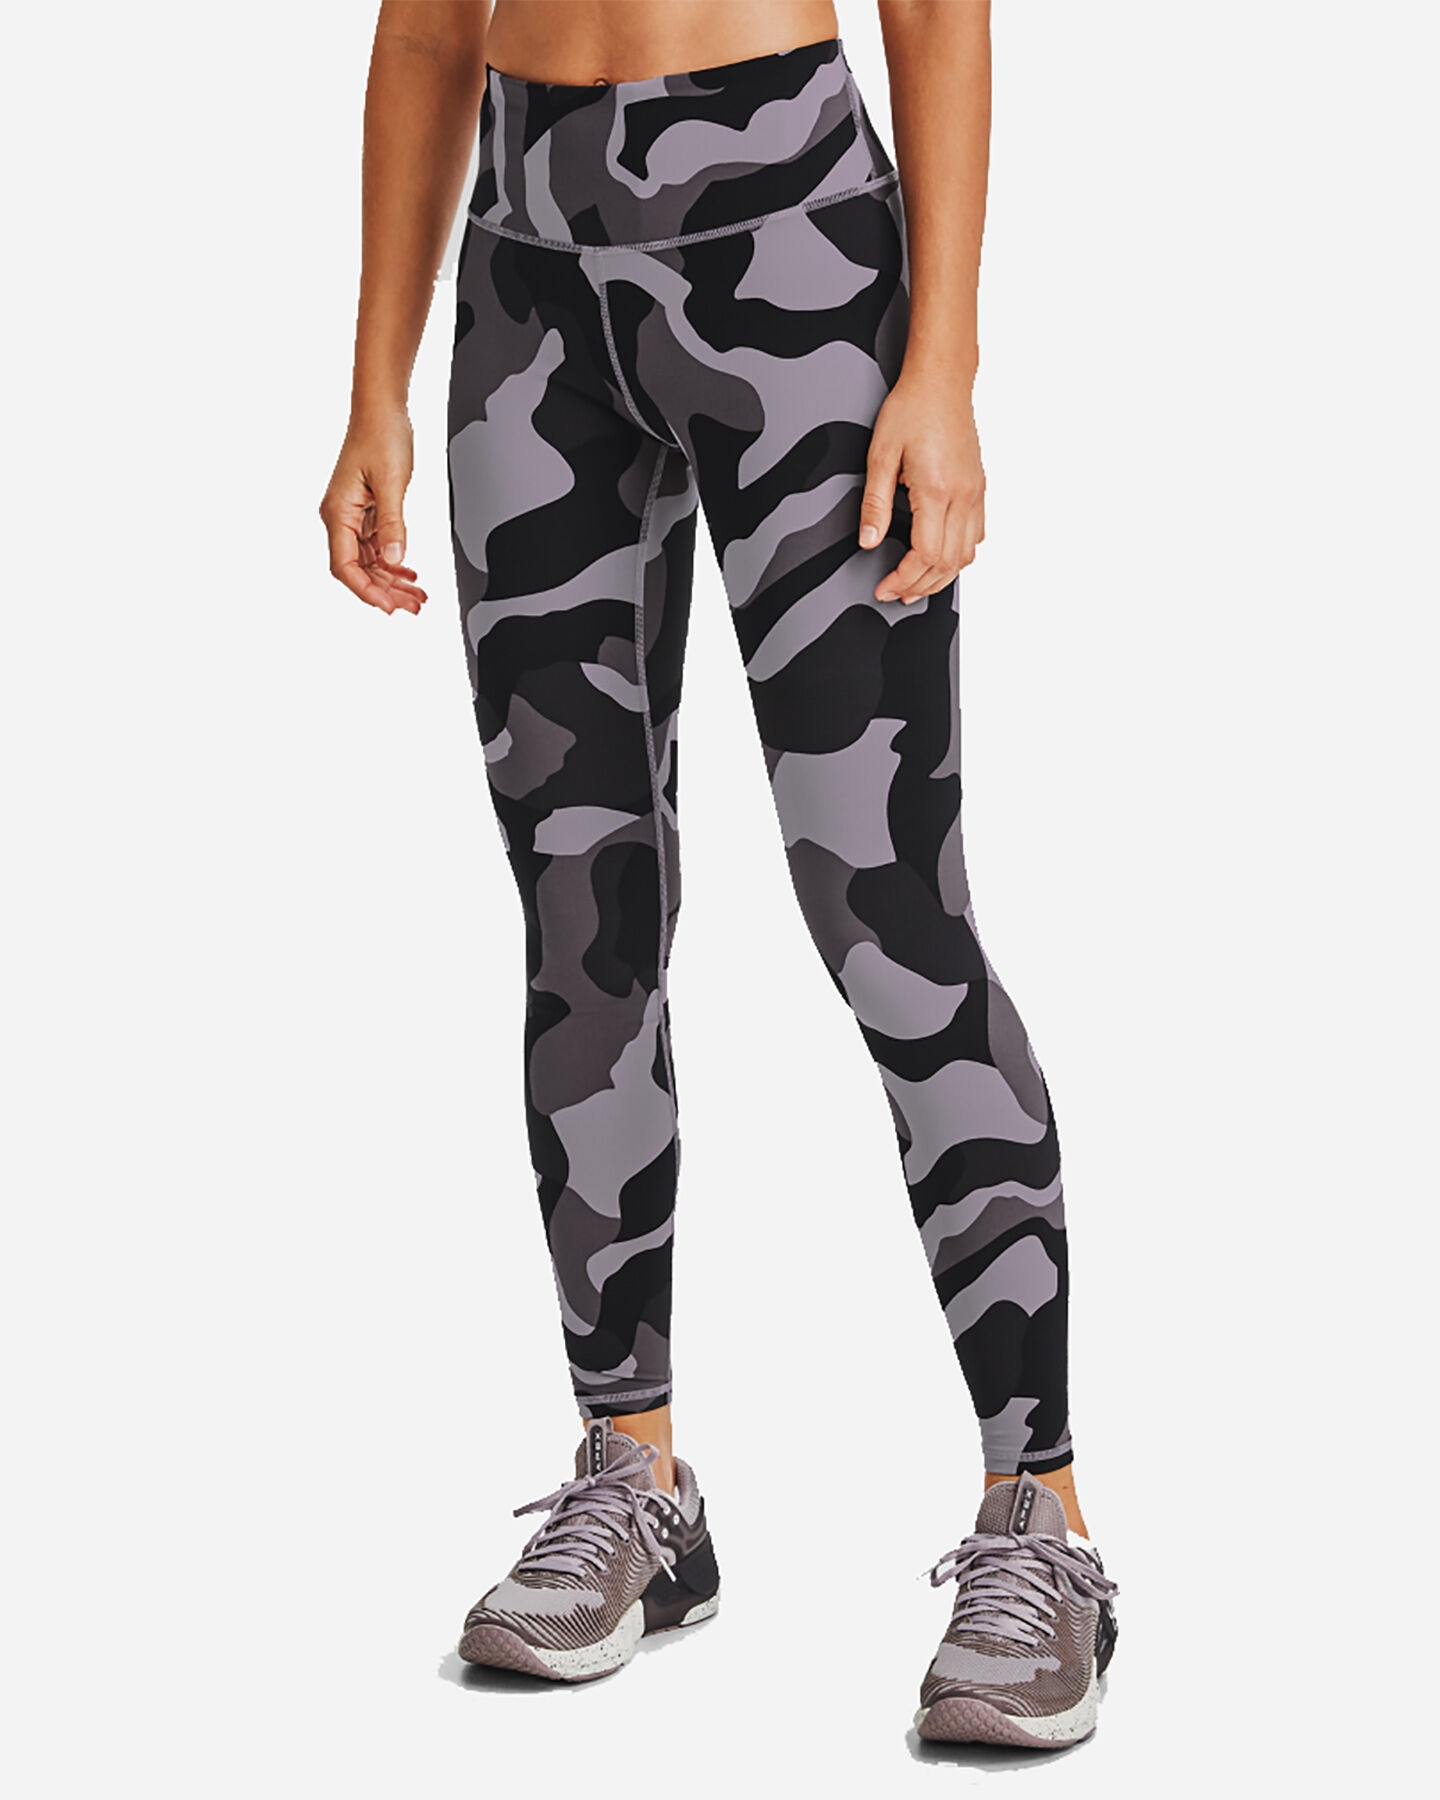  Leggings UNDER ARMOUR CAMOU RUSH W S5229989|0585|XS scatto 0